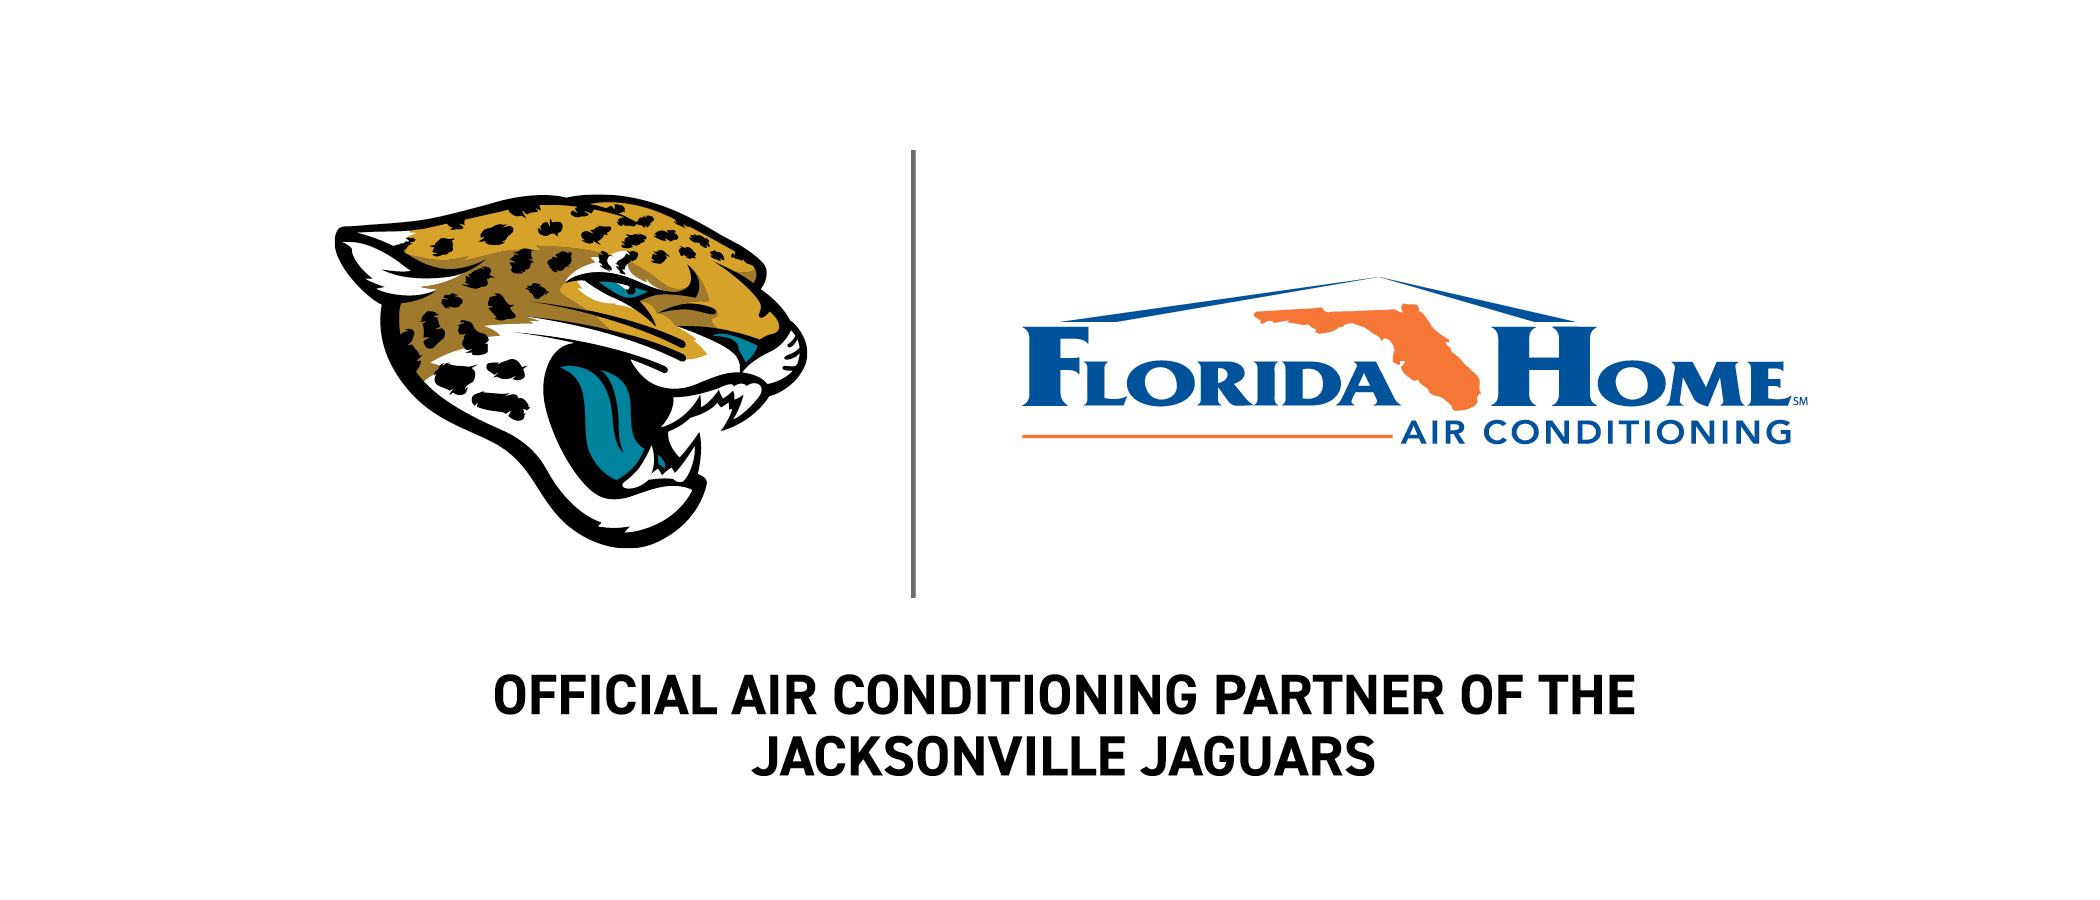 Florida Home Air Conditioning, Official Air Conditioning Partner of the Jacksonville Jaguars